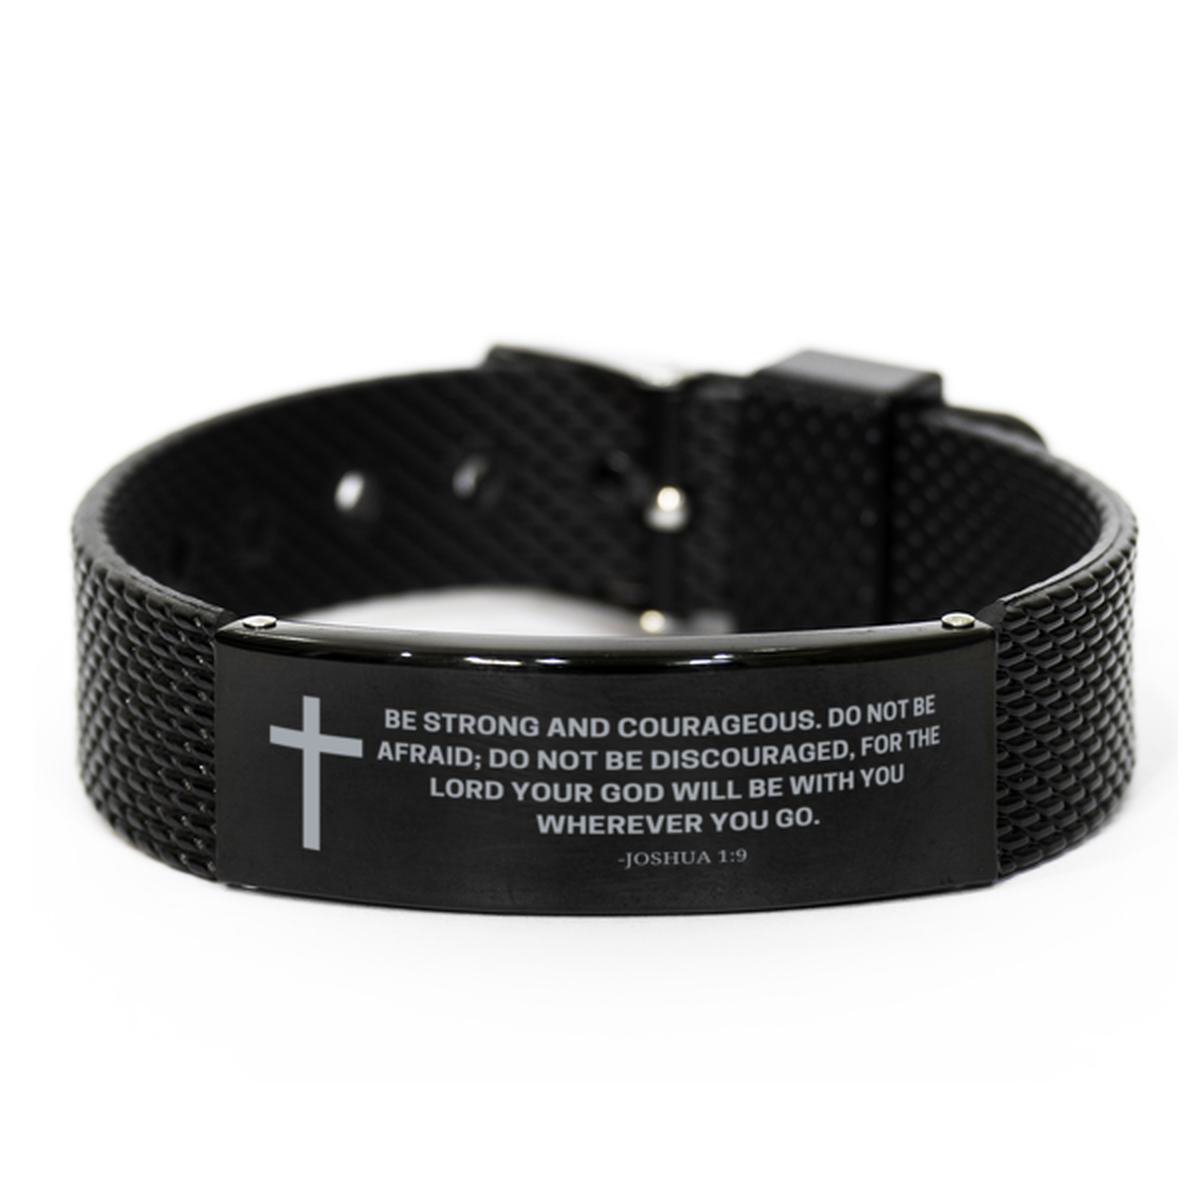 Baptism Gifts For Teenage Boys Girls, Christian Bible Verse Black Shark Mesh Bracelet, For the lord your God will be with you, Catholic Confirmation Gifts for Son, Godson, Grandson, Nephew